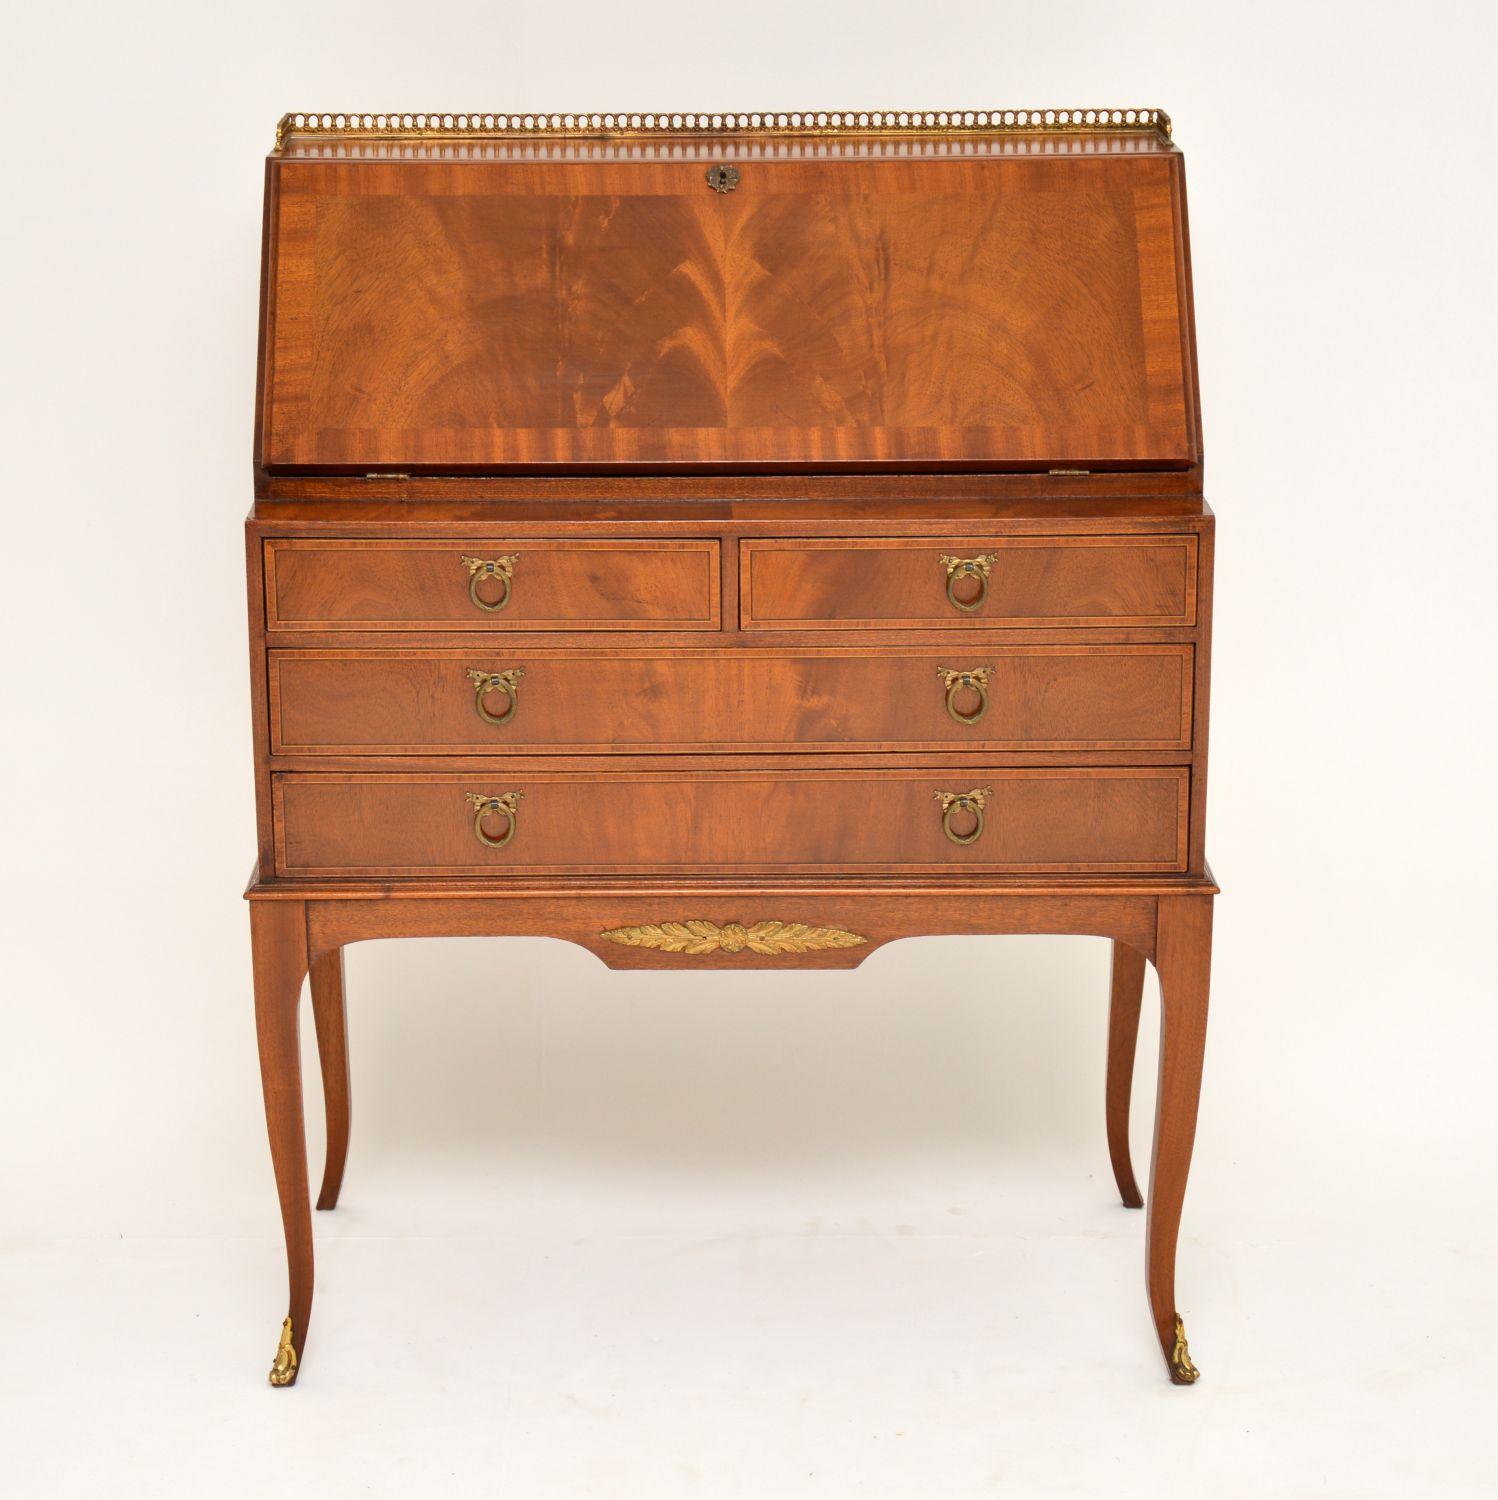 Fine quality antique mahogany bureau in good original condition, which I would date to circa 1910 period. It has a gilt metal pierced gallery on the top, plus gilt handles, mounts and feet. I think this bureau is English with a French neoclassical